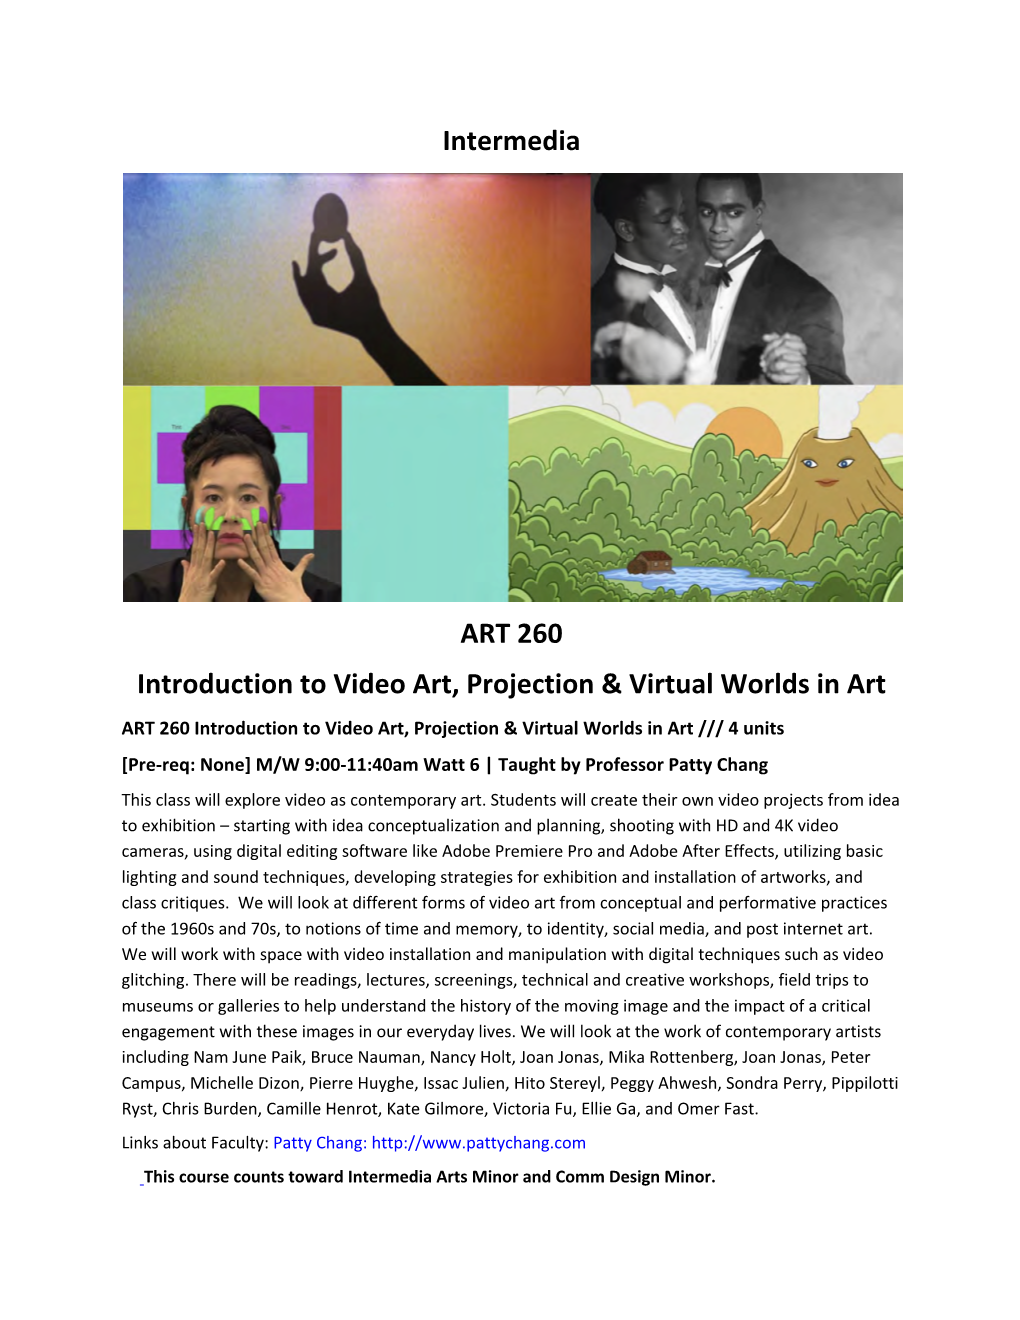 Intermedia ART 260 Introduction to Video Art, Projection & Virtual